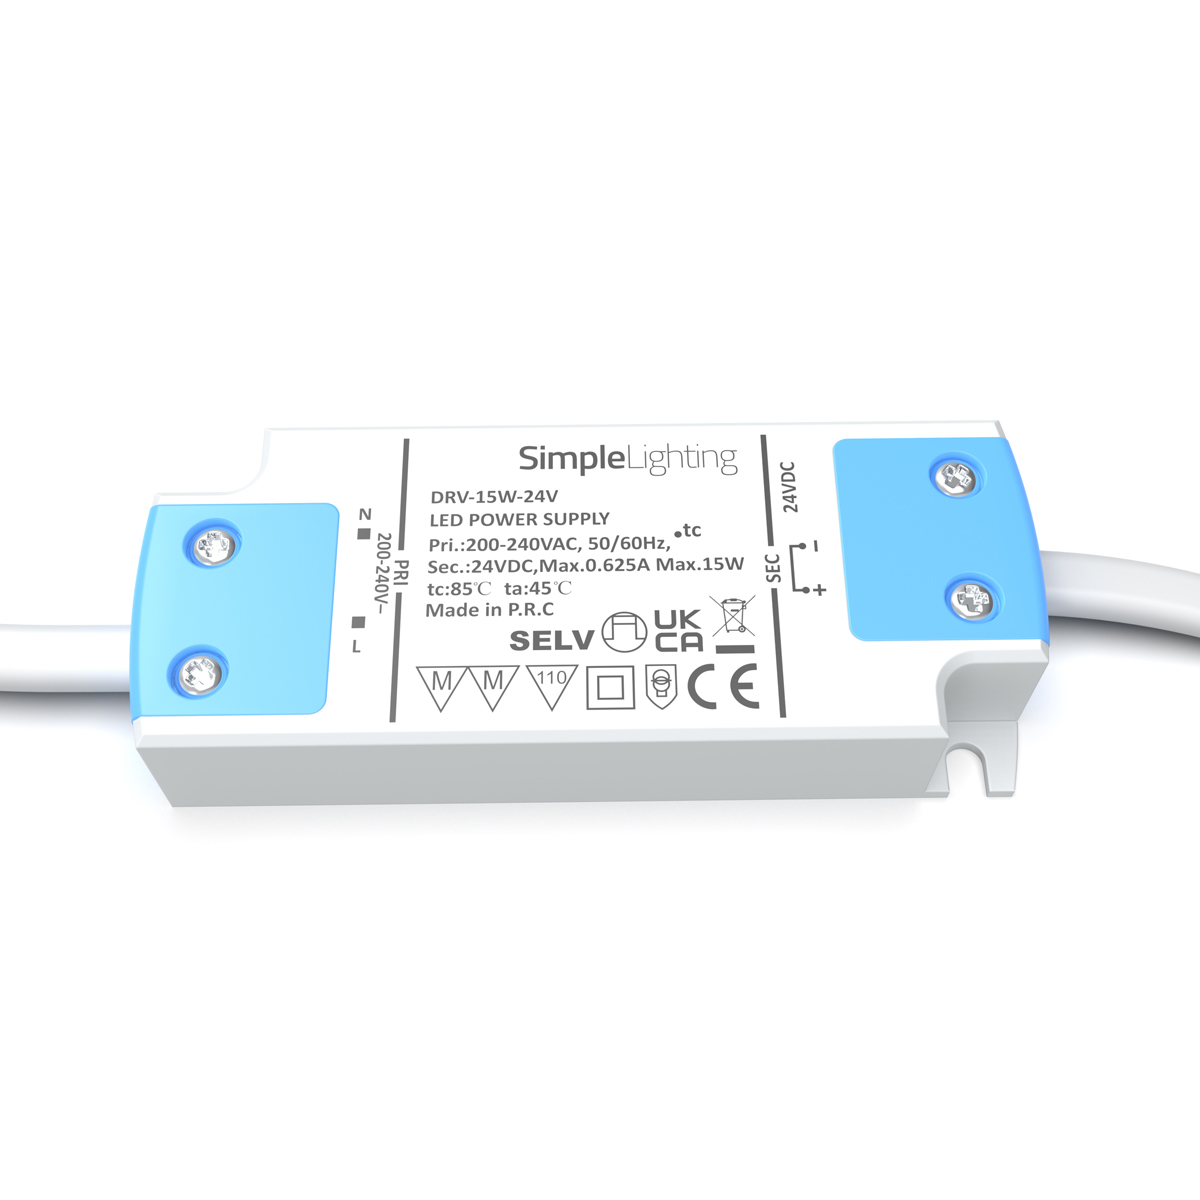 View 15w 24v LED Driver IP20 Rated information